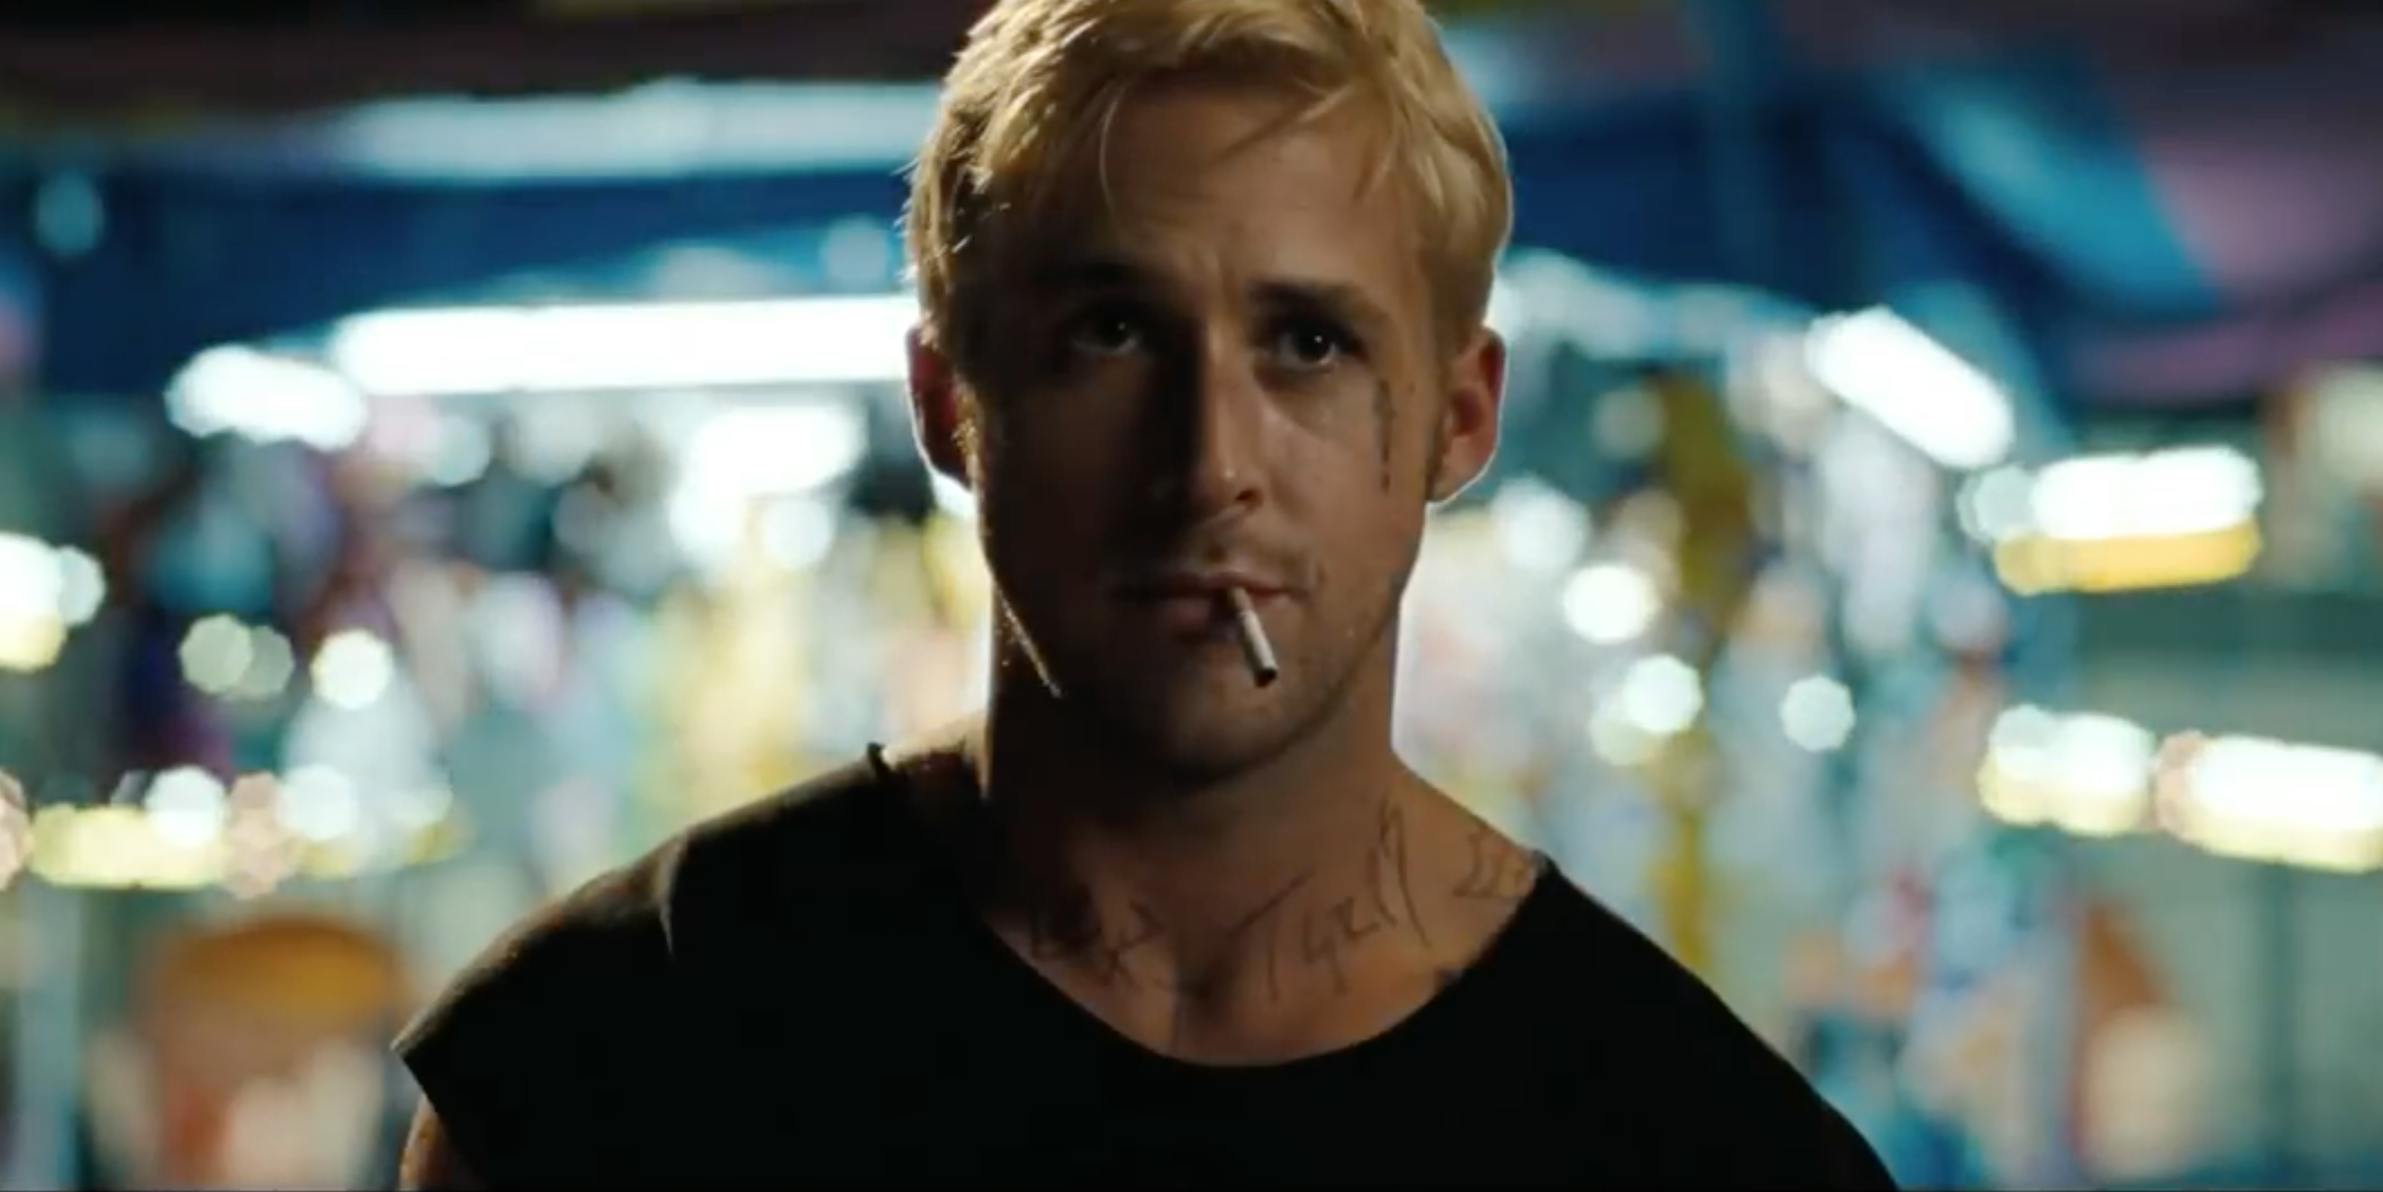 saddest moves netflix : The Place Beyond the Pines